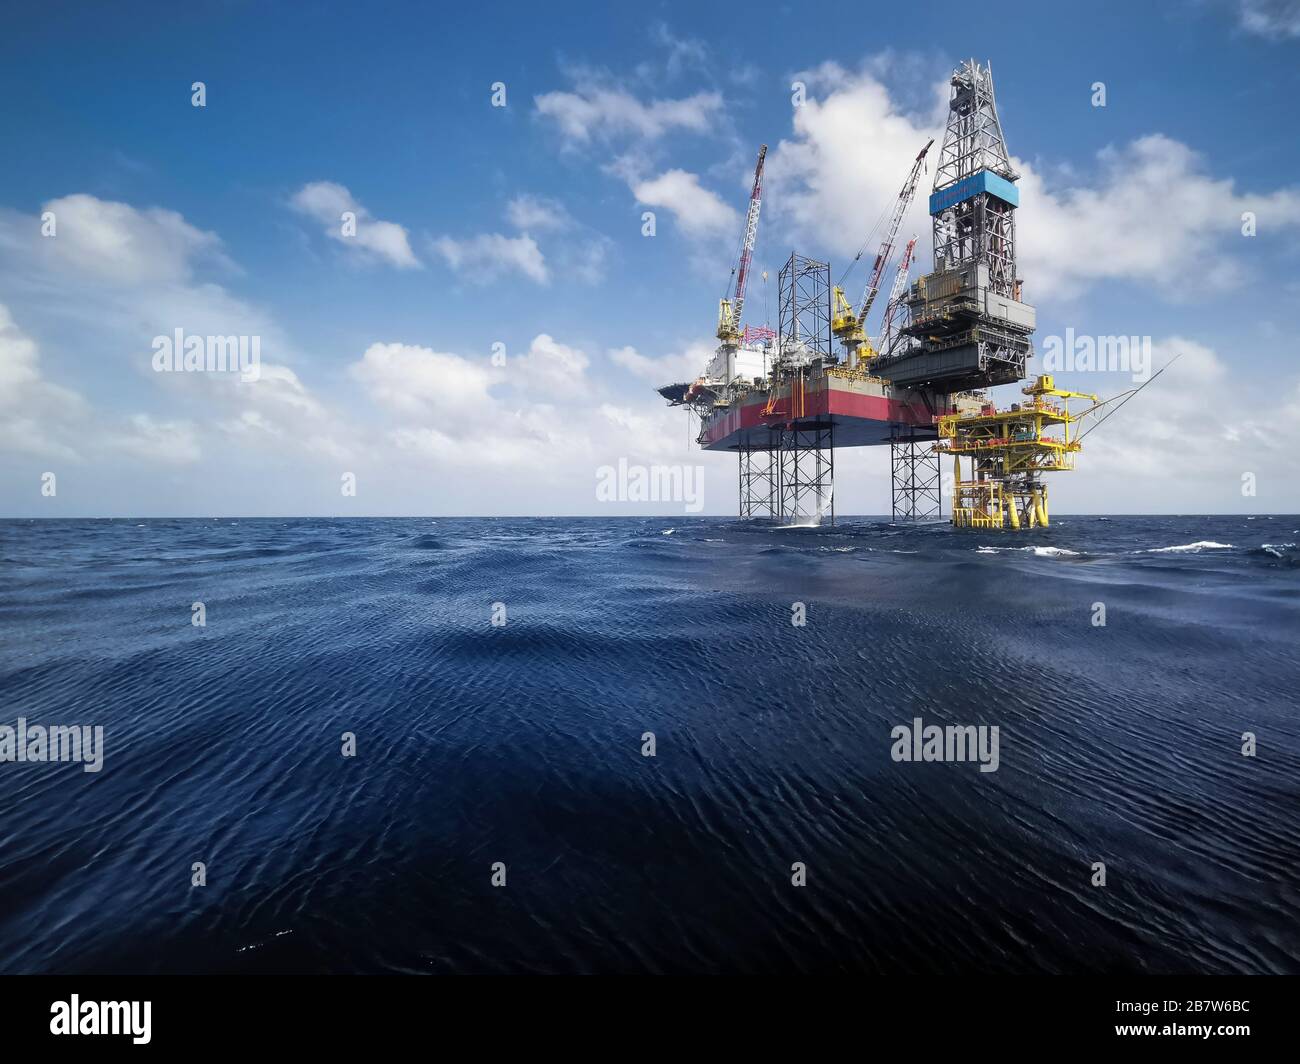 jack up rig with oil platform drilling at oil fields with beautiful blue cloudy sky at ocean Stock Photo